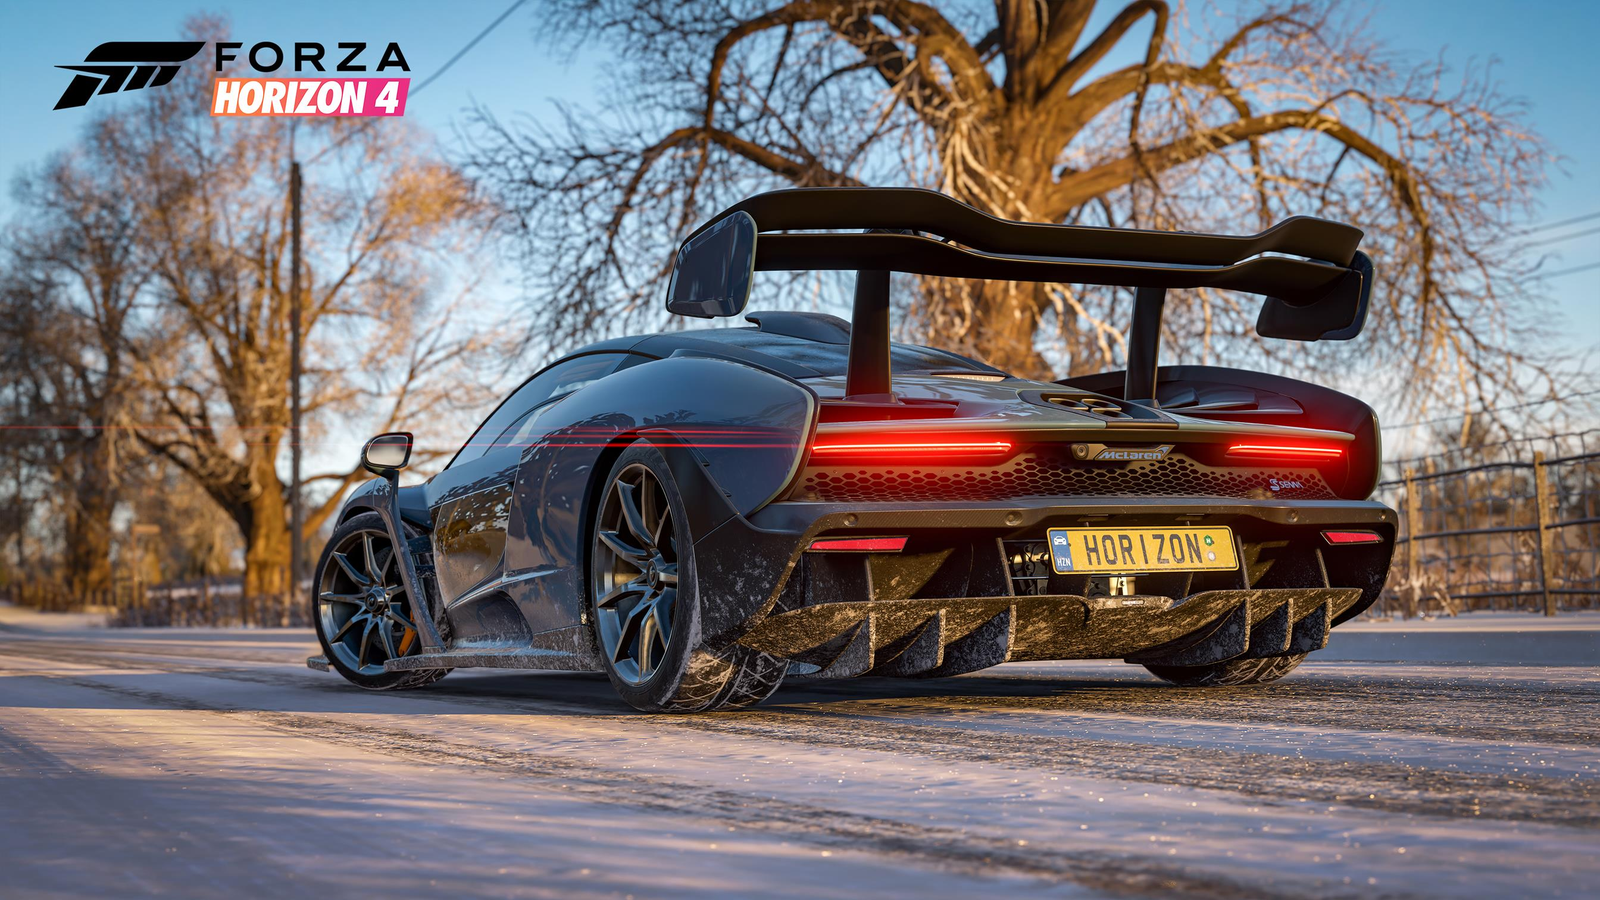 Forza Horizon 4 (Digital Download) - For Xbox One and & Windows 10 PC -  Full game download included - ESRB Rated E (Everyone)